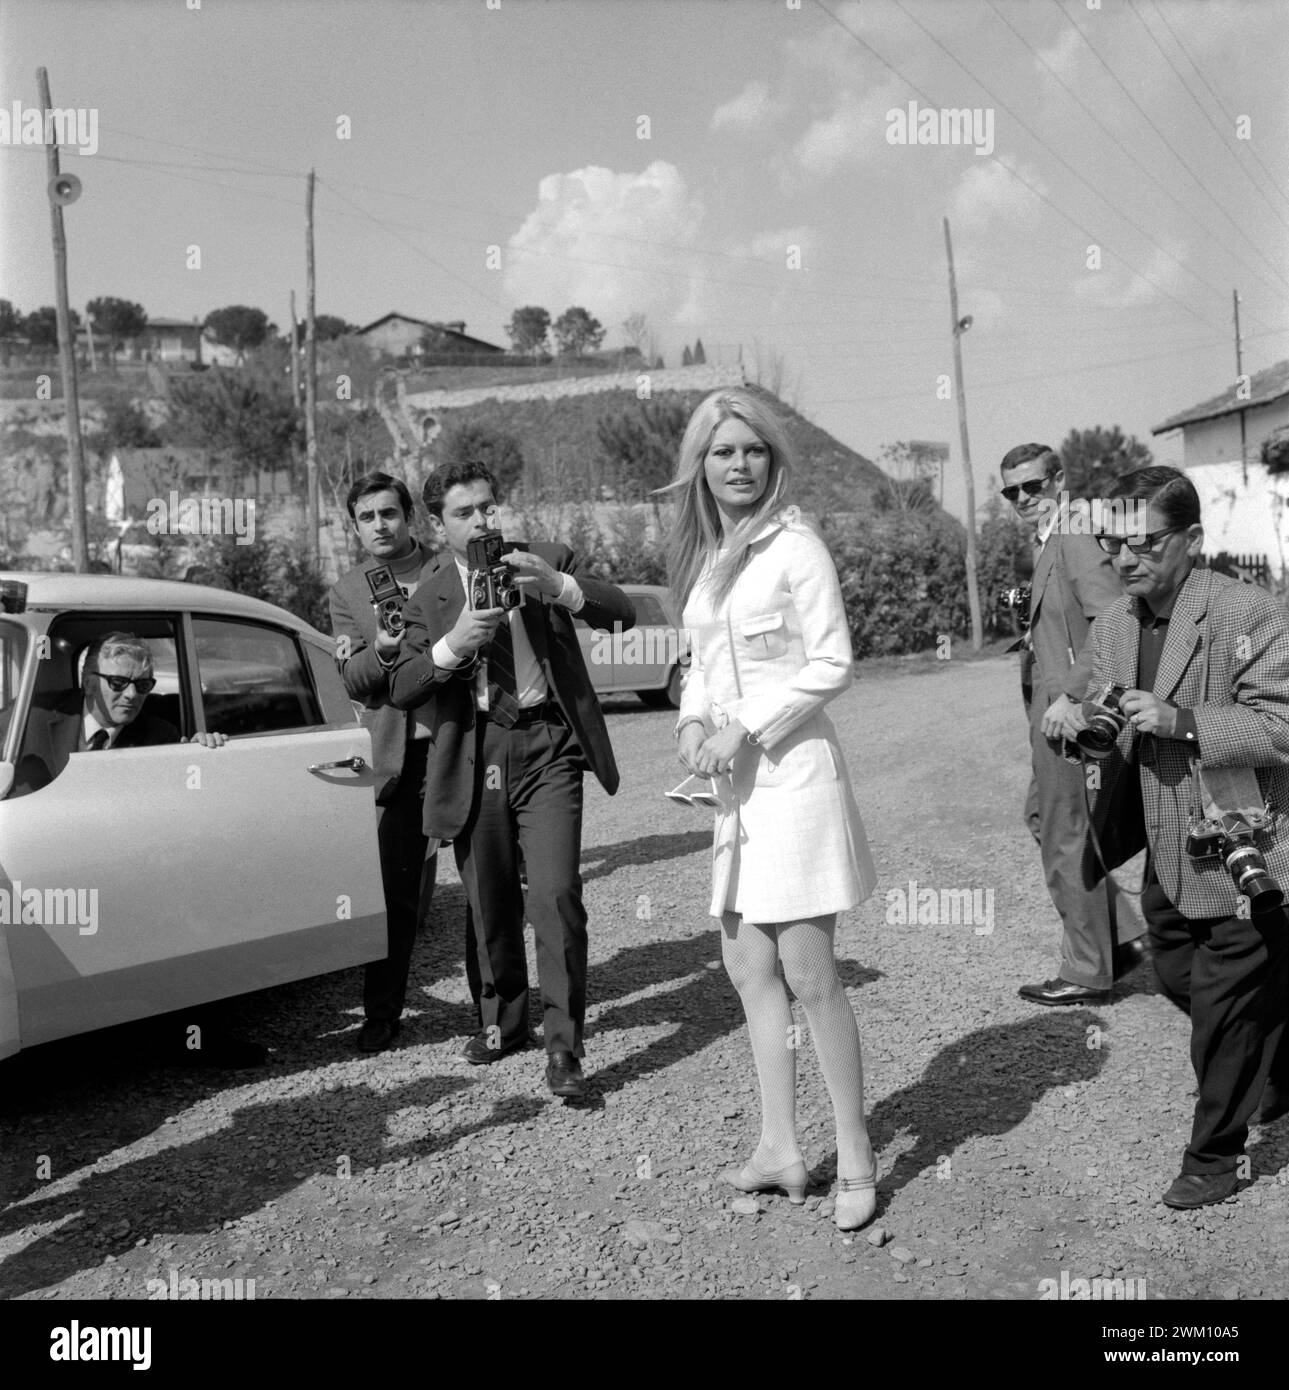 3823843 Brigitte Bardot, 1965 (b/w photo); (add.info.: French actress Brigitte Bardot surprised by photographers at the restaurant 'Il Casalone' near Rome (1965) 965)); © Marcello Mencarini. All rights reserved 2024. Stock Photo